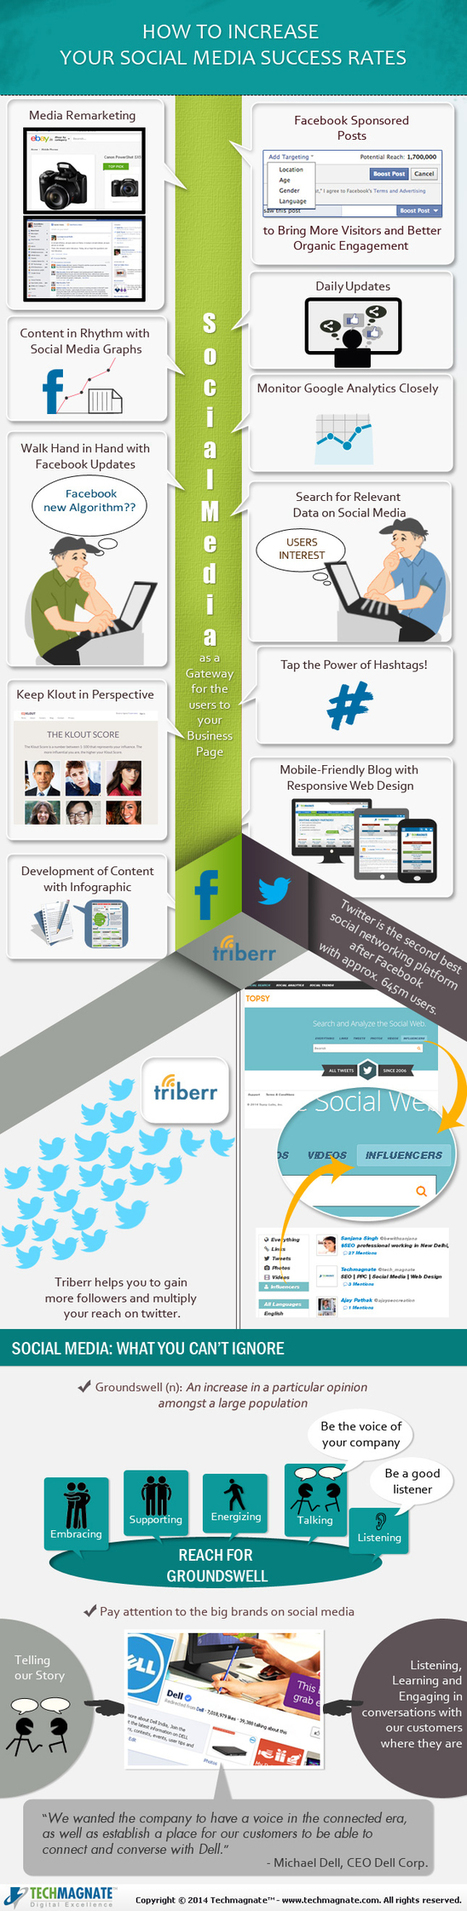 Social Media Infographic: How To Increase Your Success Rates? | e-commerce & social media | Scoop.it